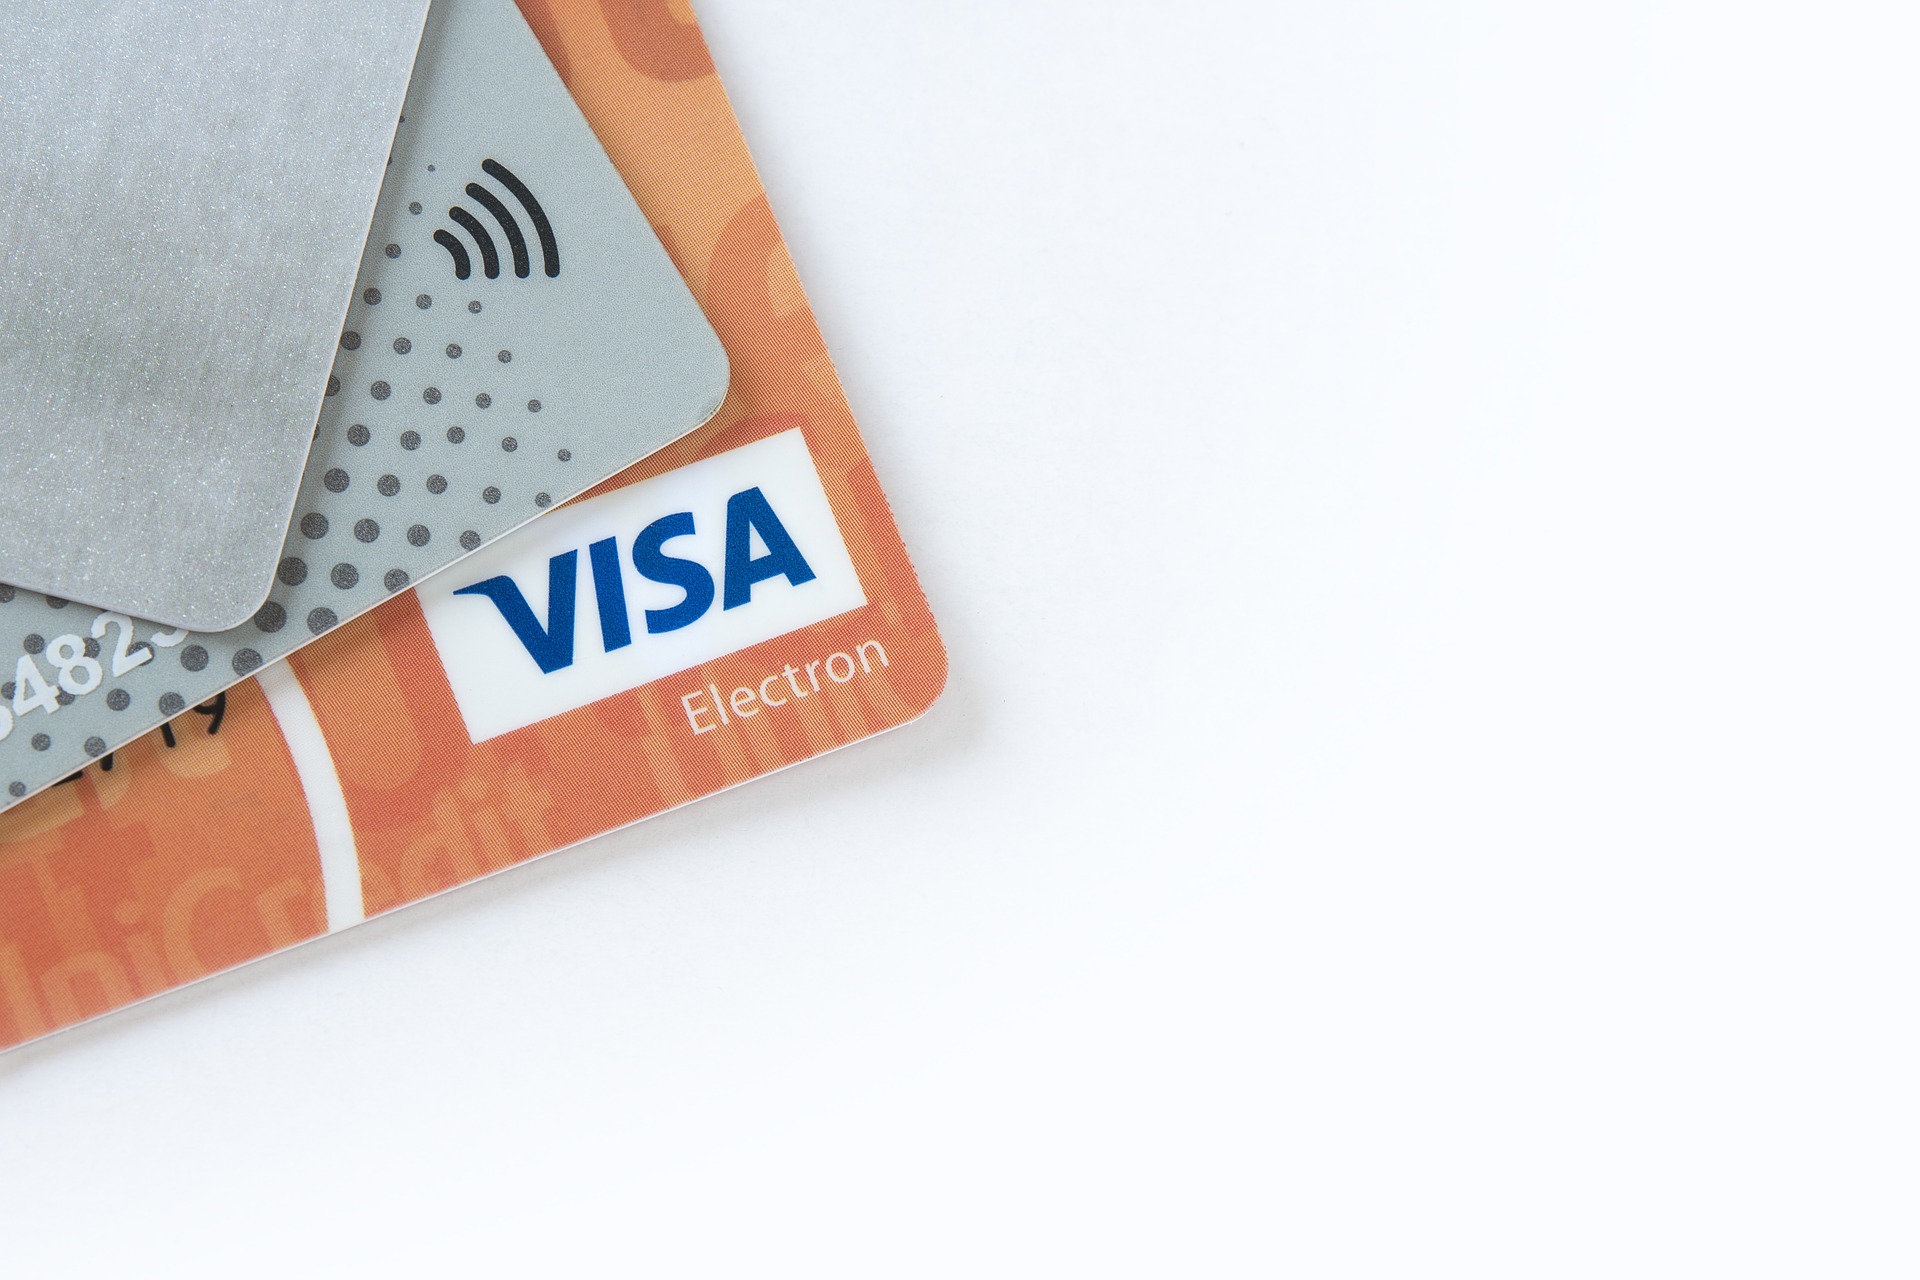 According to government, spending limit on contactless card payments in France is to rise from € 30 to € 50 starting from May 11th 2020.